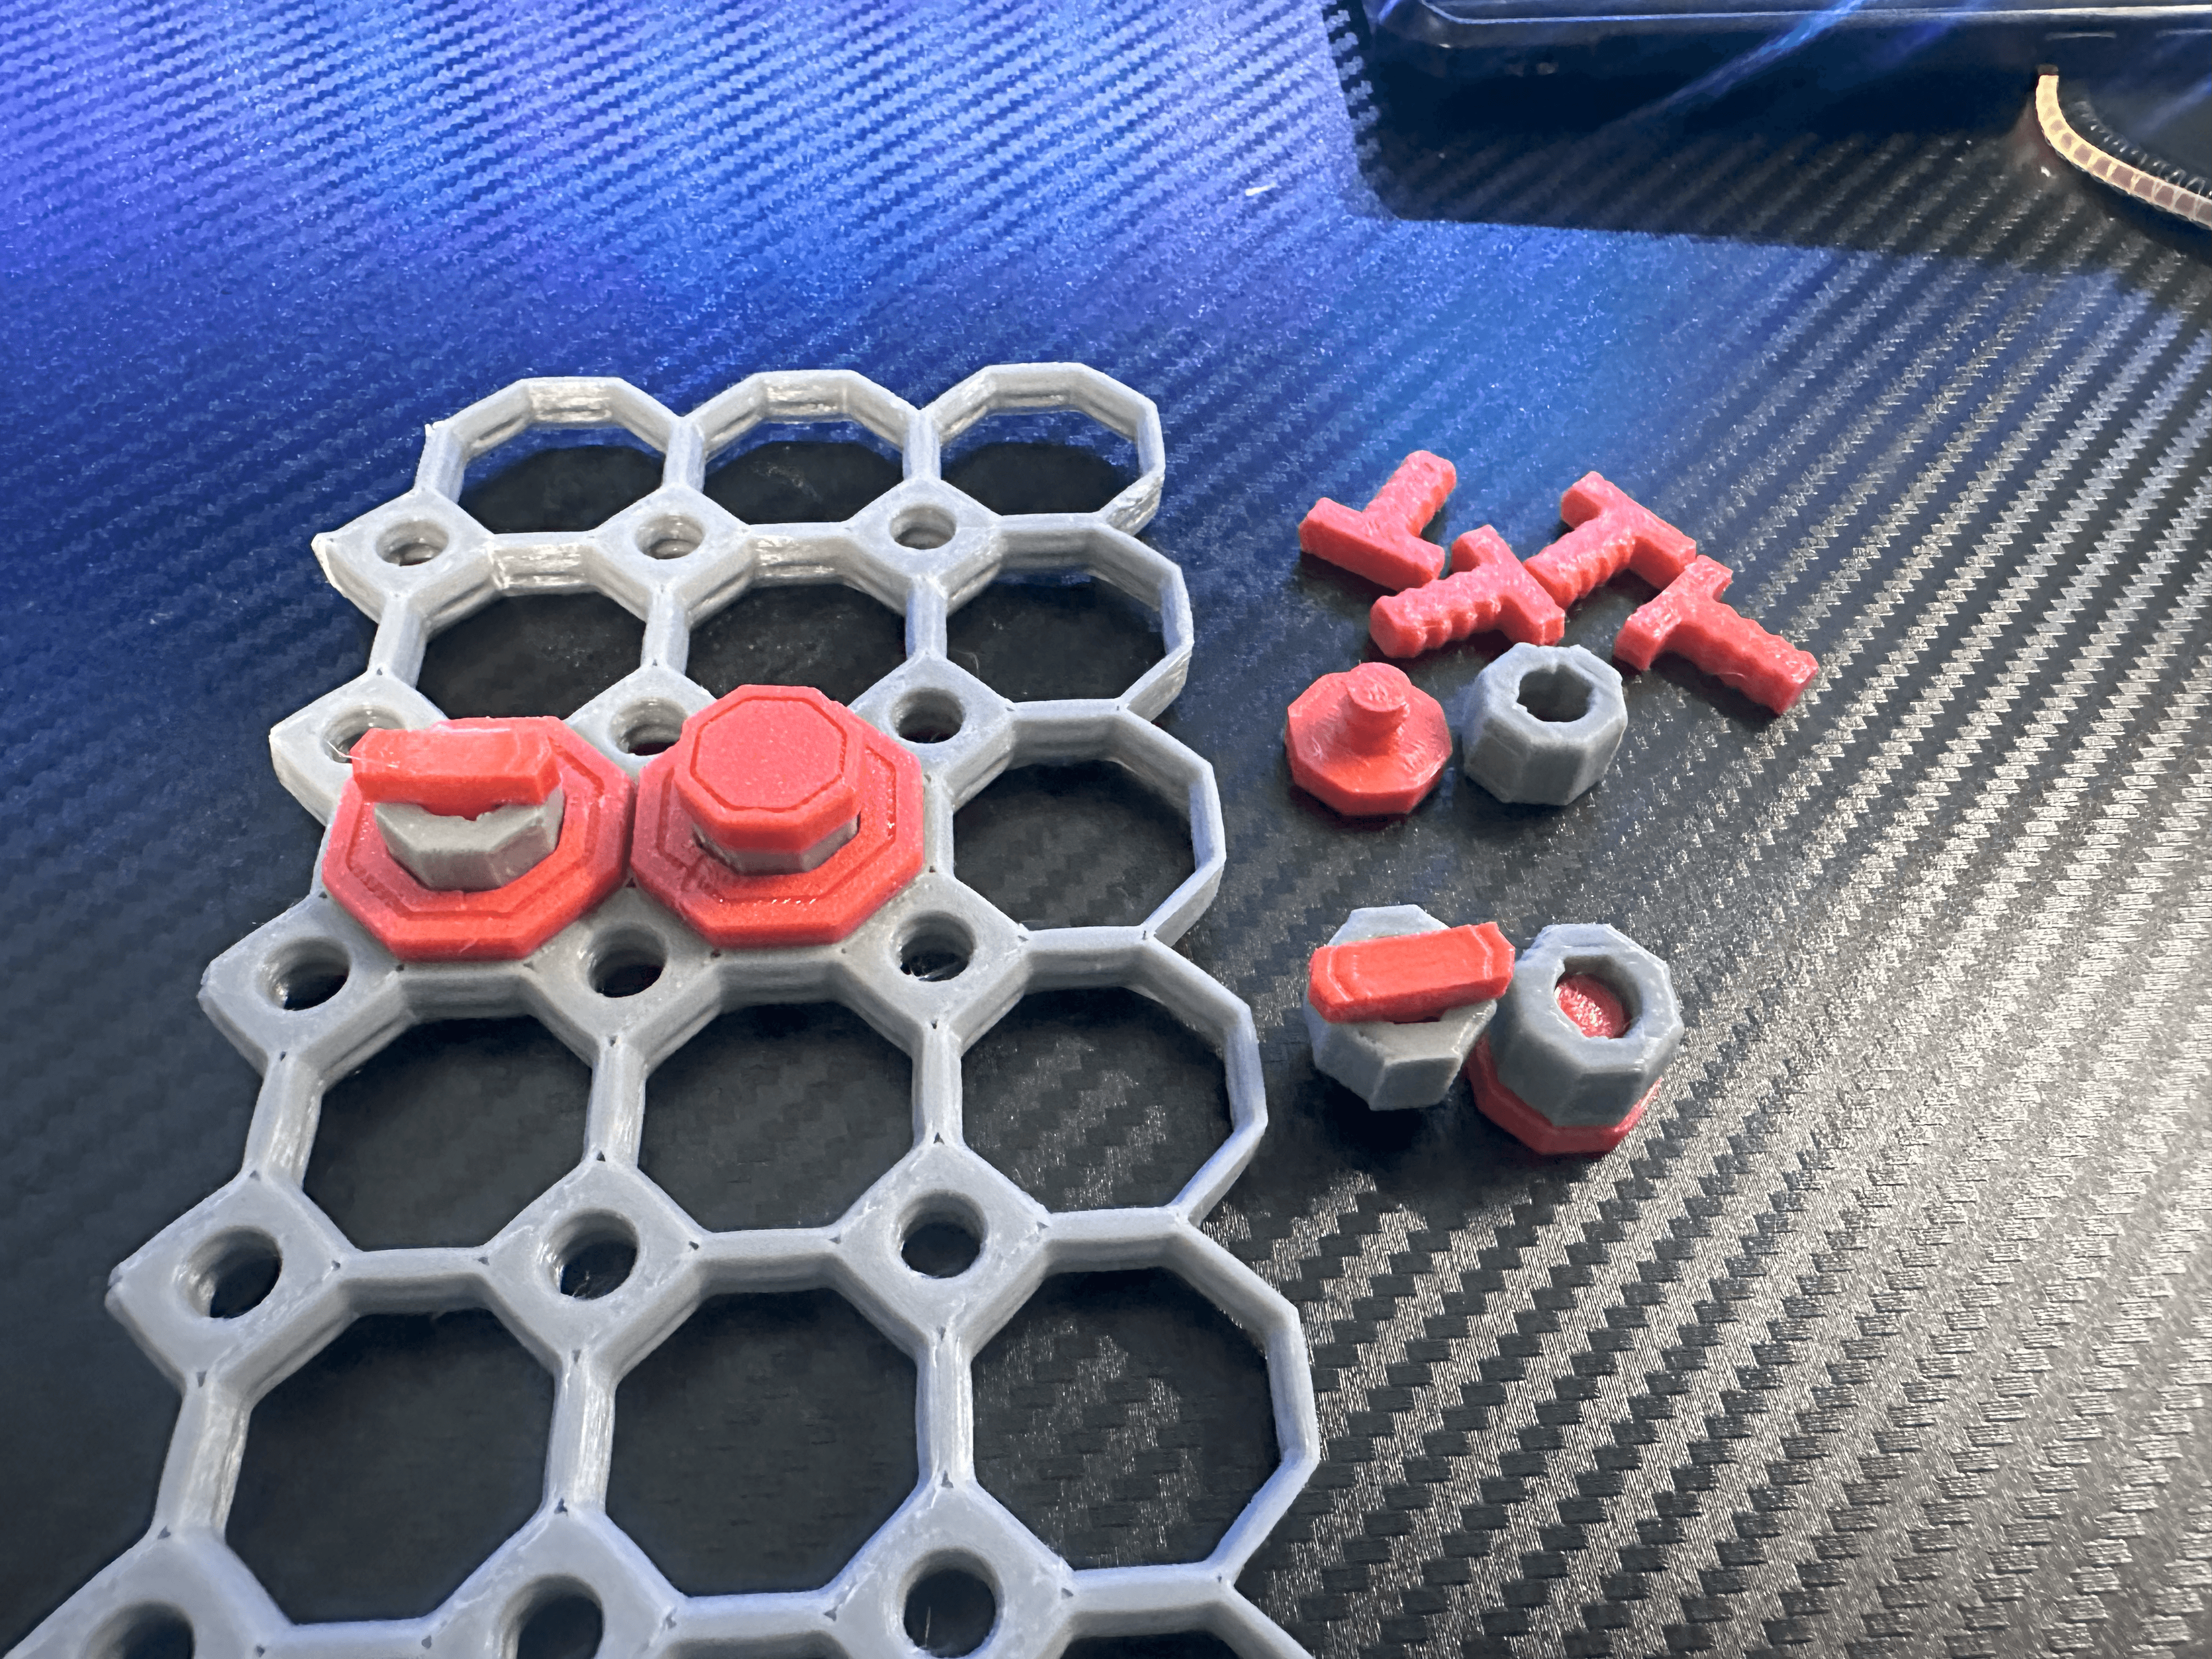 Push Fit Nuts for Multiboard 3d model